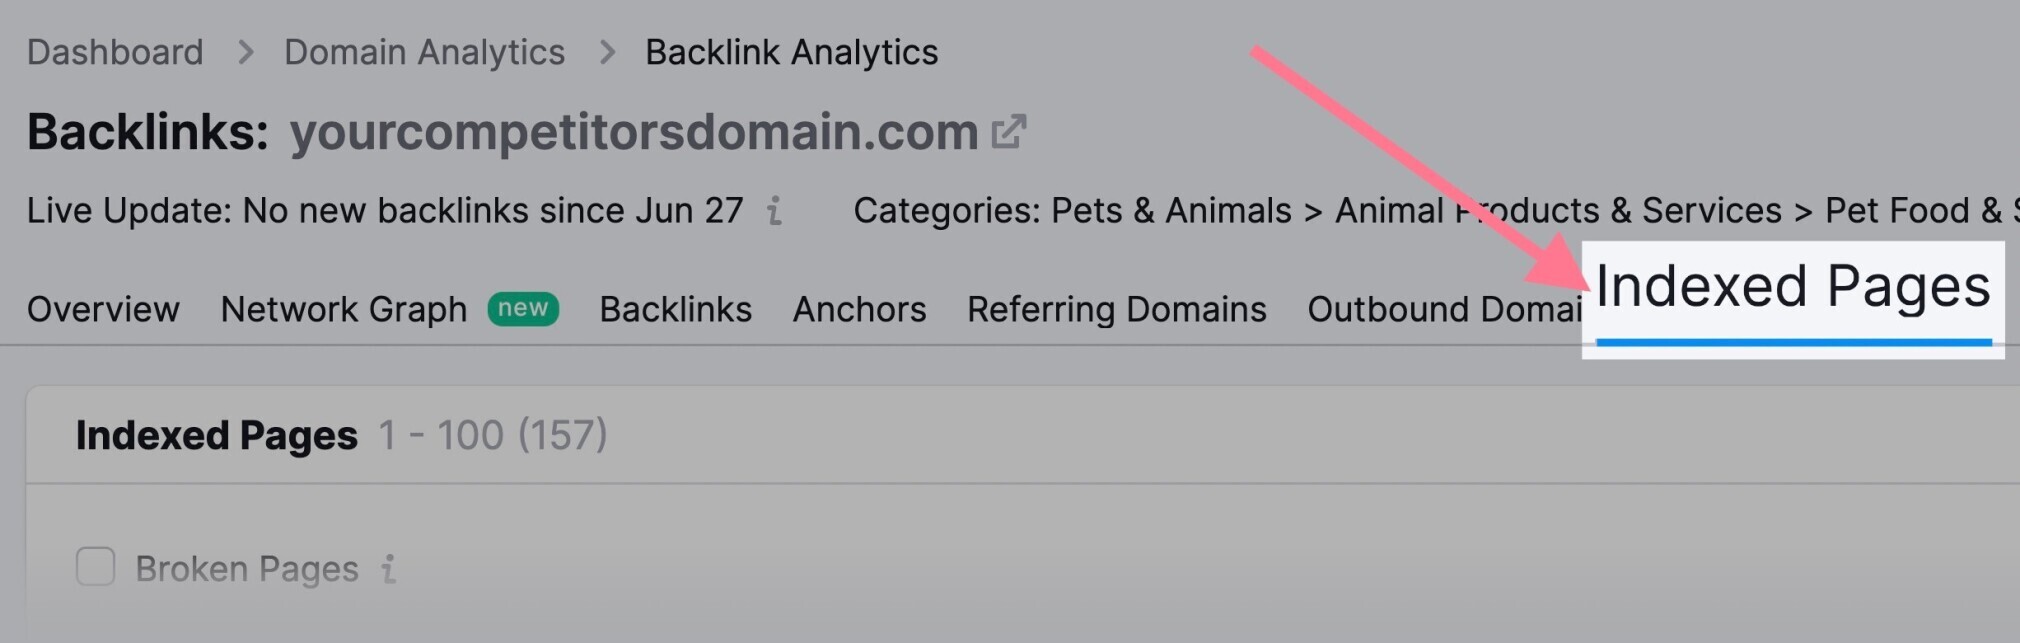 semrush backlink analytics indexed pages tab